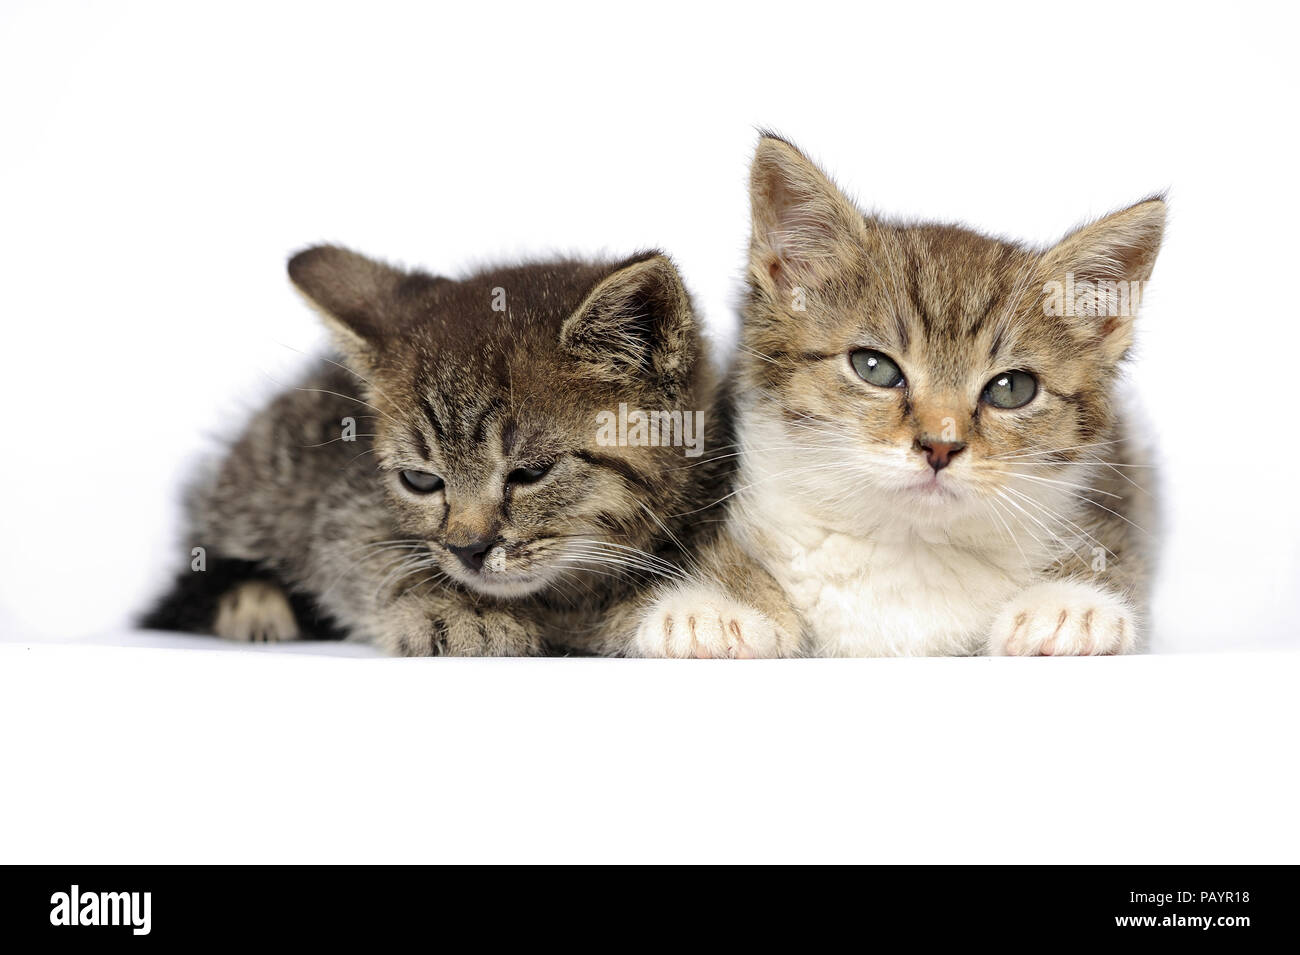 animals, cats, ear, emotion, empty, expression, eyes, young, domestic, domestic animal, domestic cat, domestic cats Stock Photo